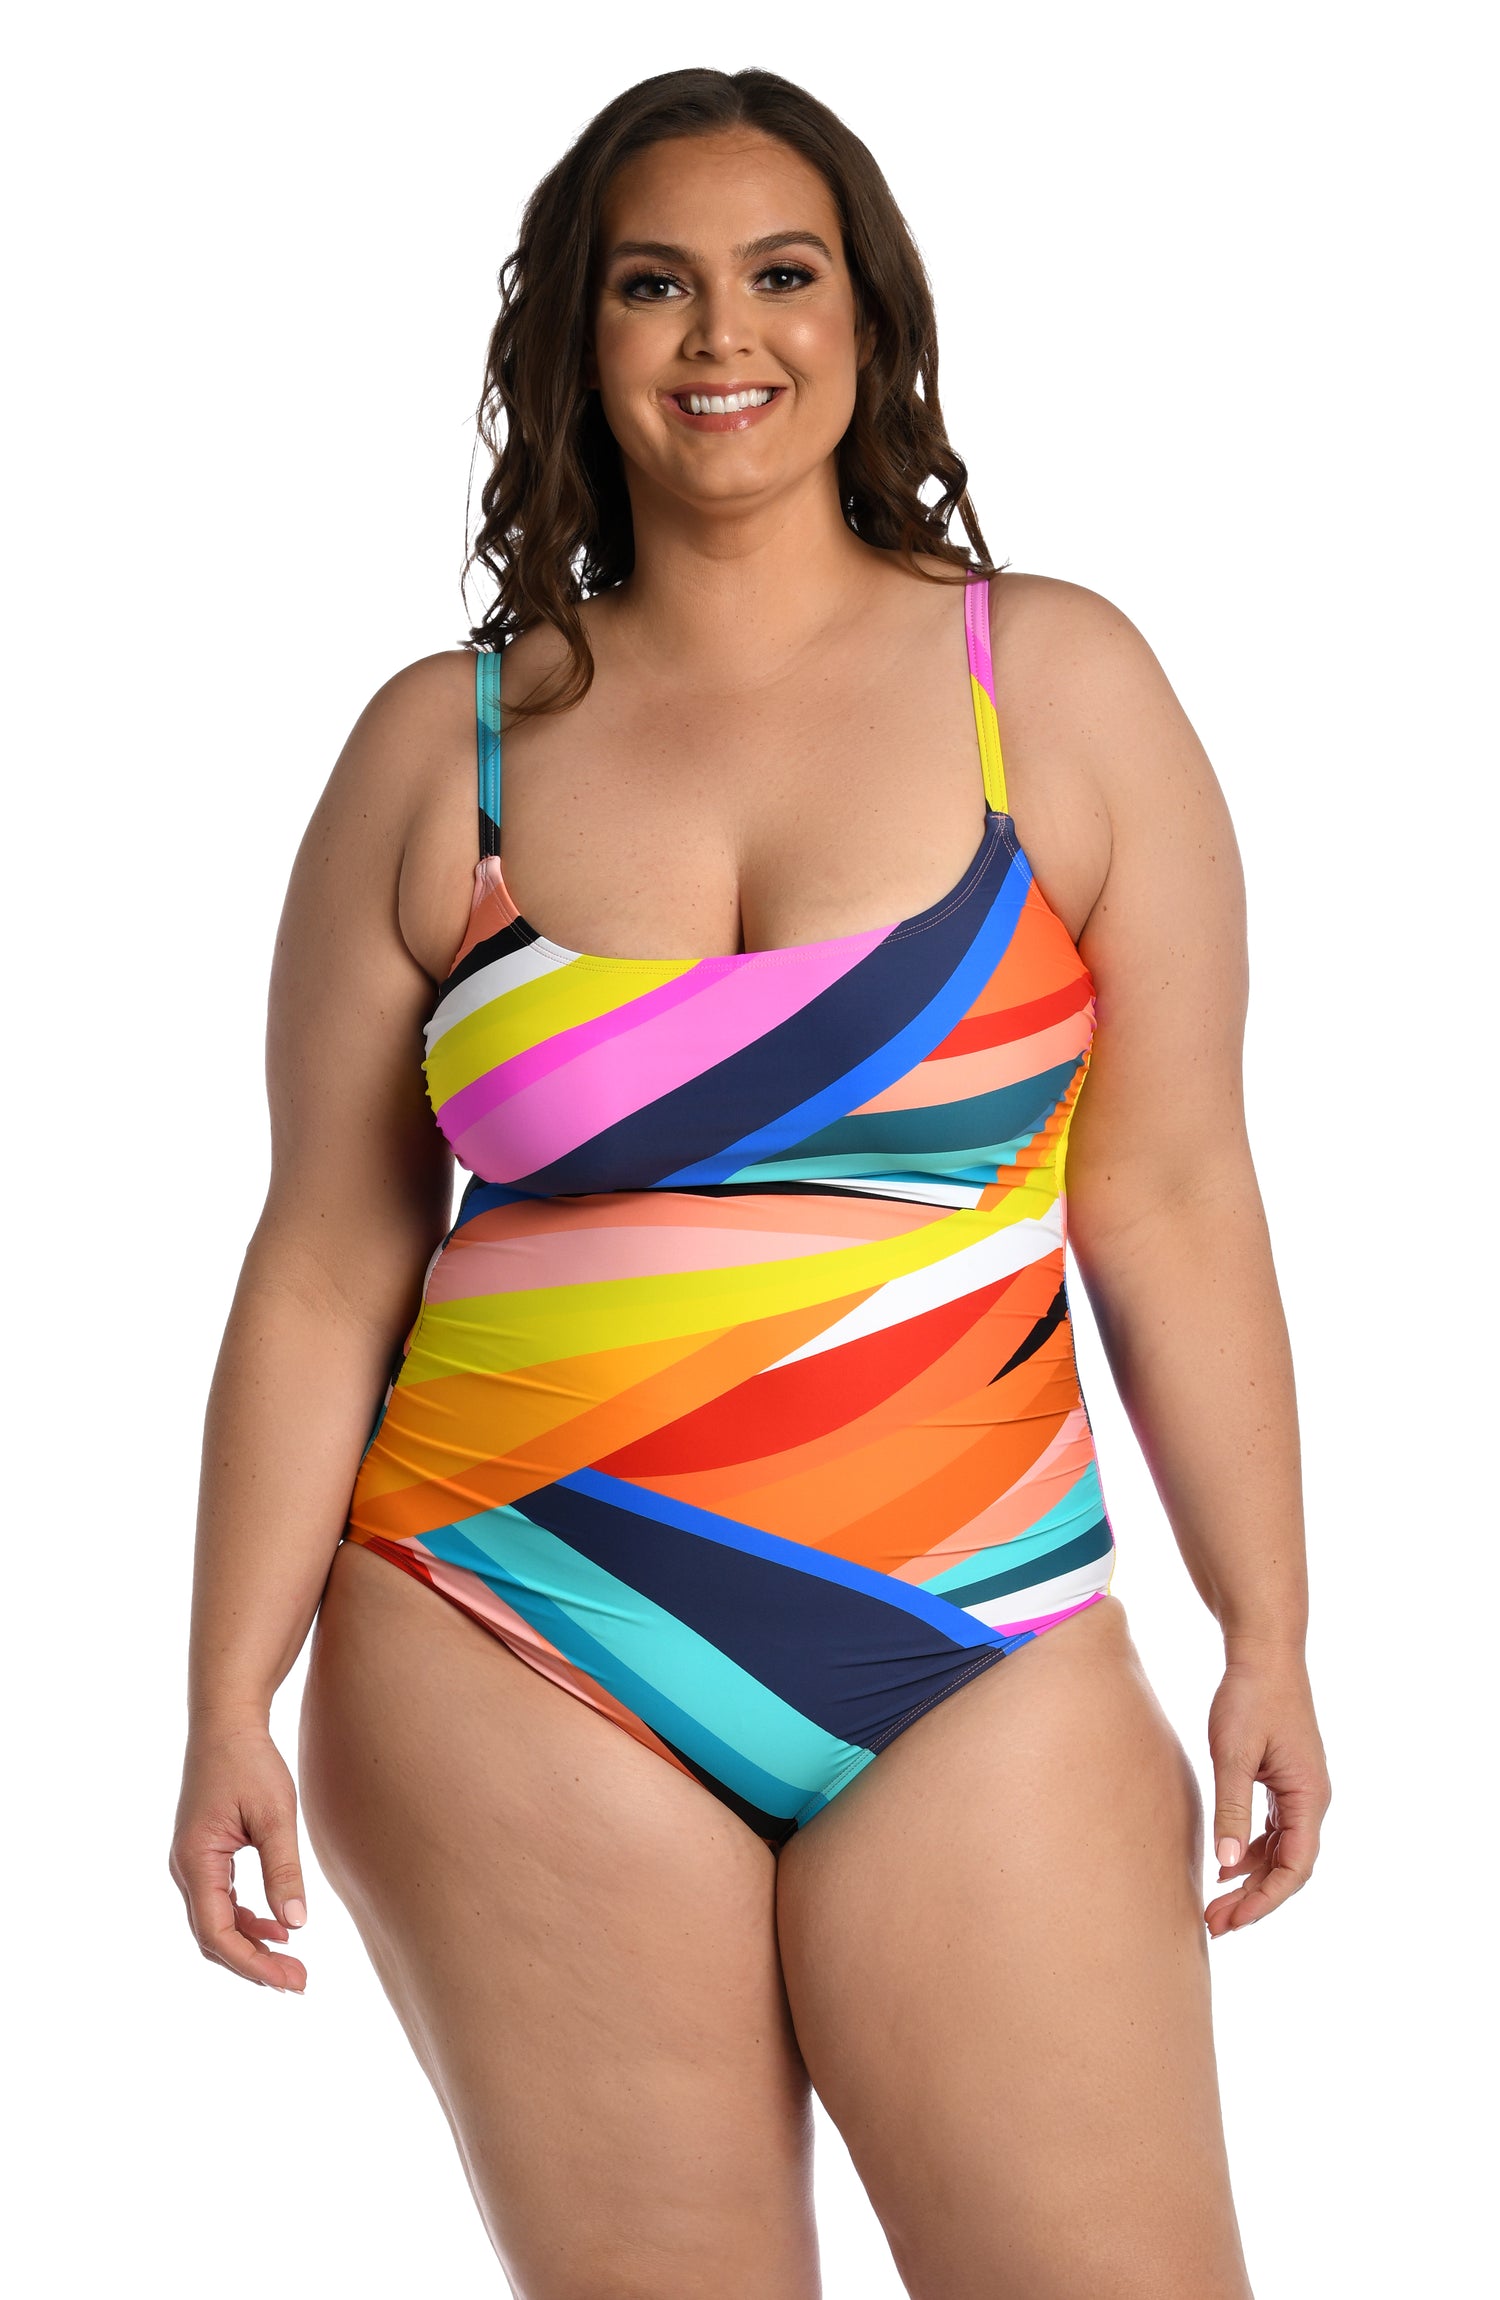 18 Black One Piece Swimsuits For 2023 - Brit + Co